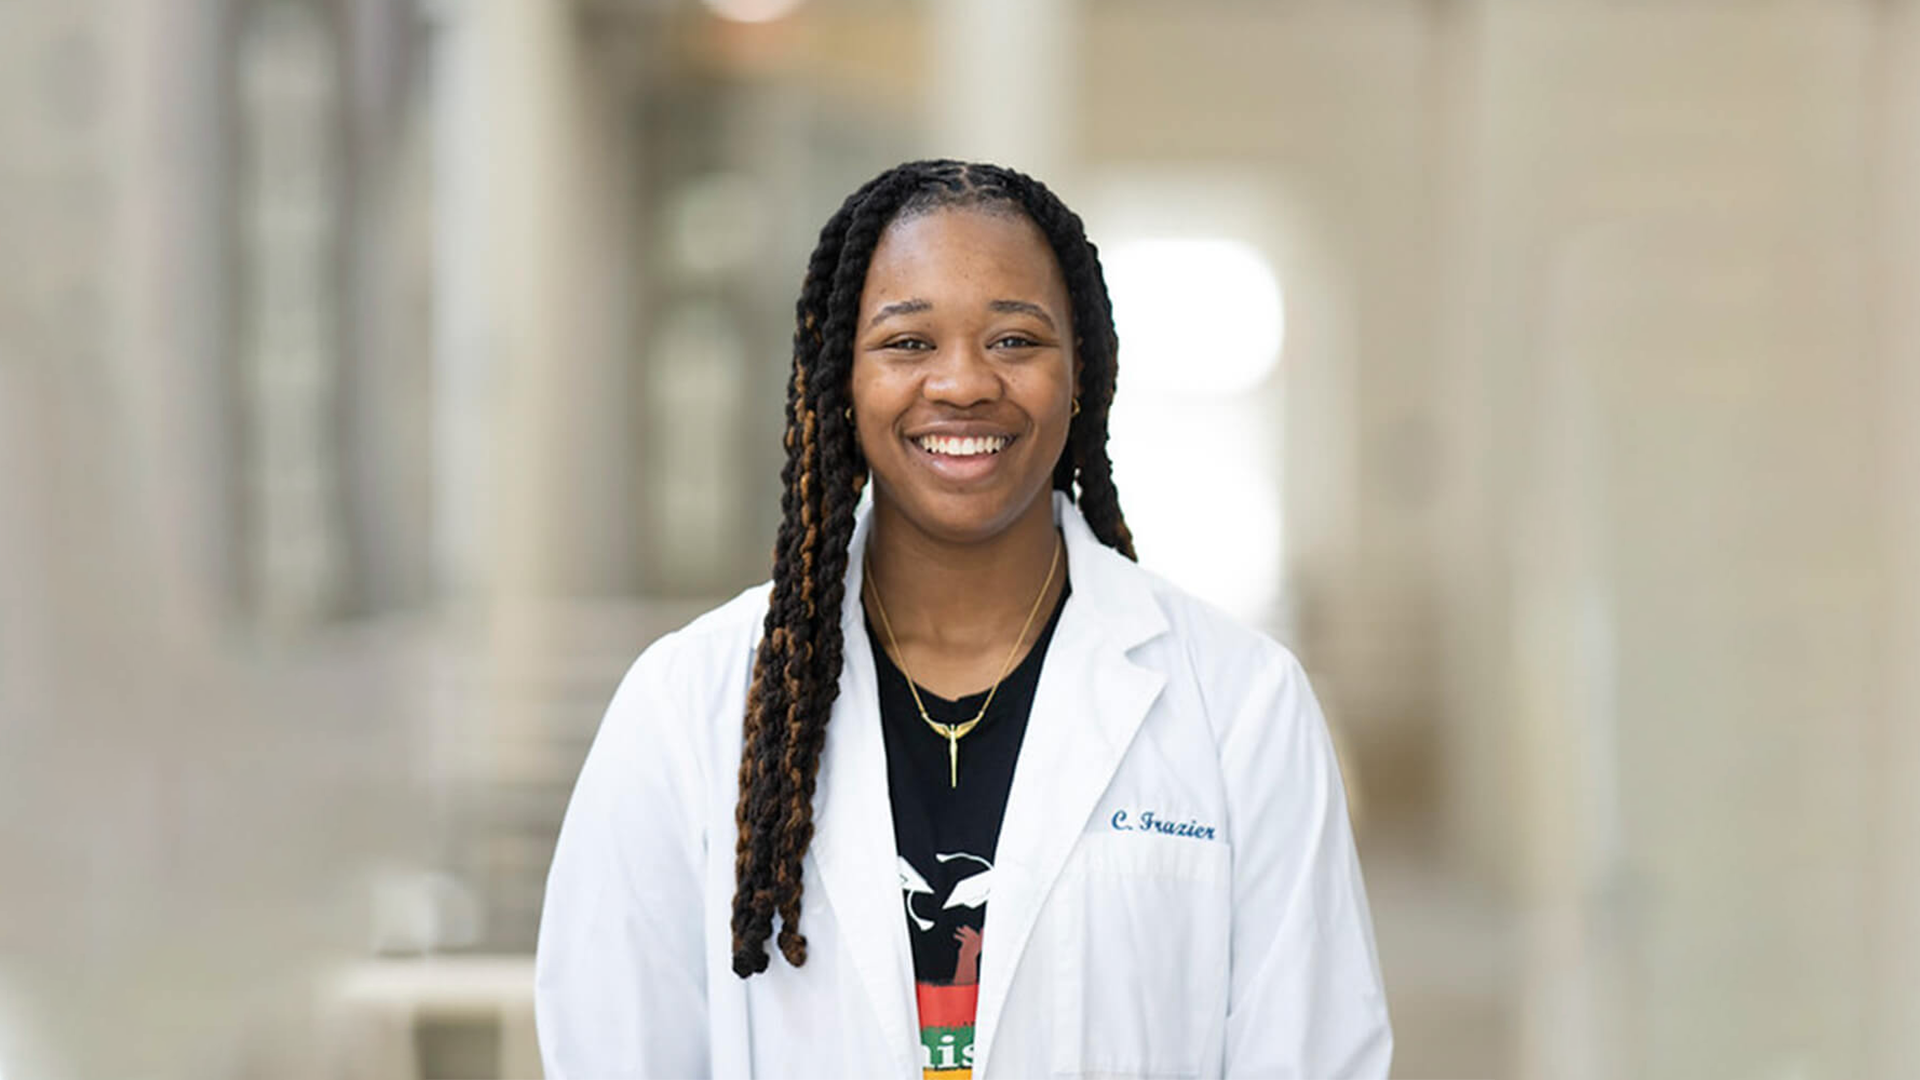 Chantrell Frazier is the First Black Woman to Earn Doctorate in Biochemistry at Florida International University